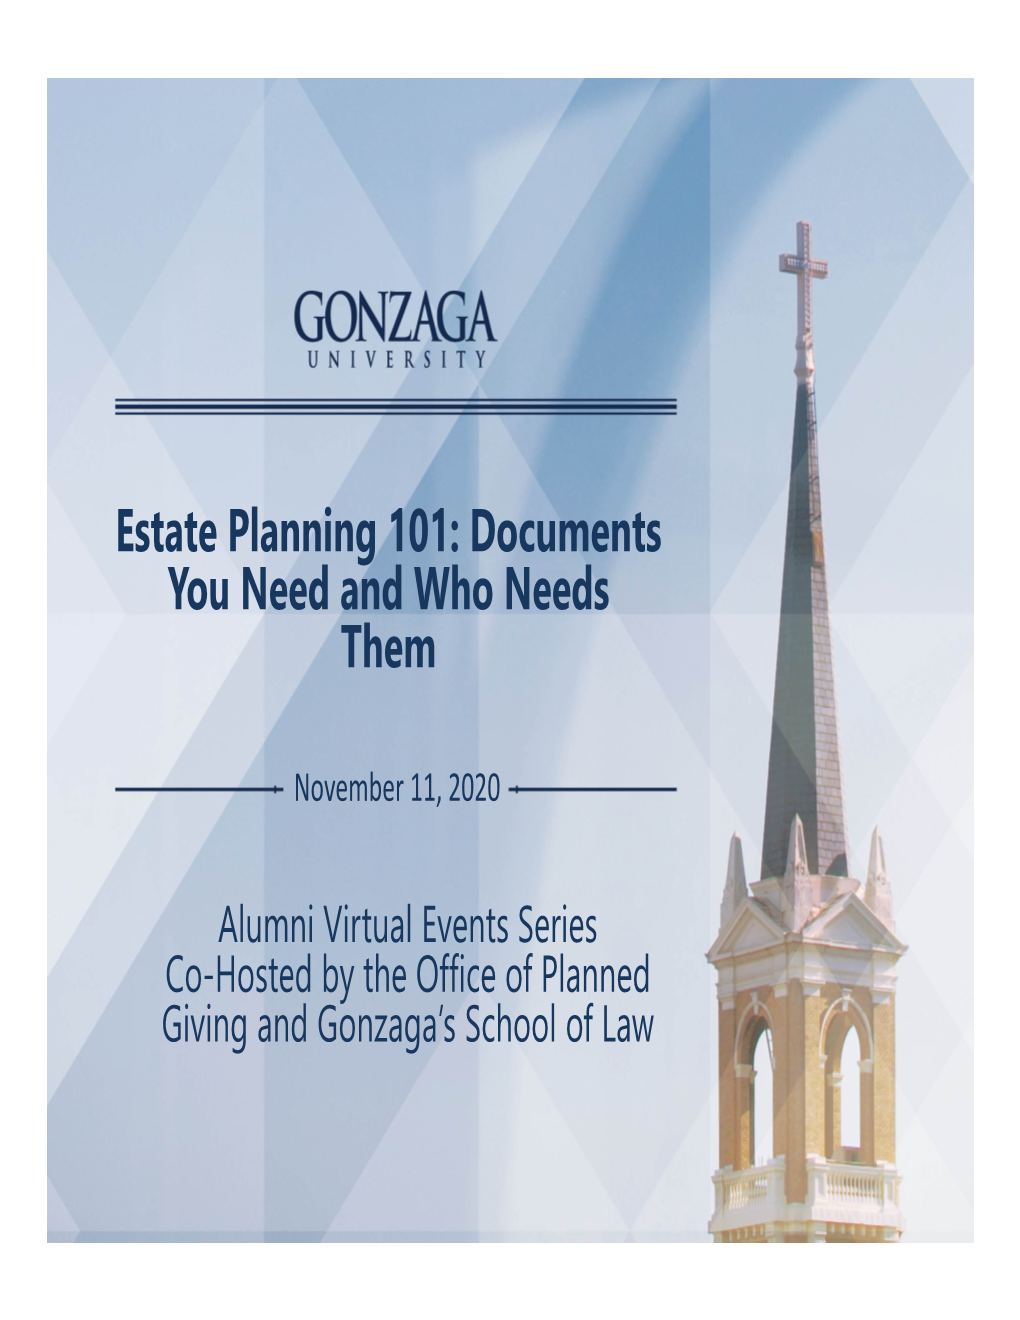 Estate Planning 101: Documents You Need and Who Needs Them